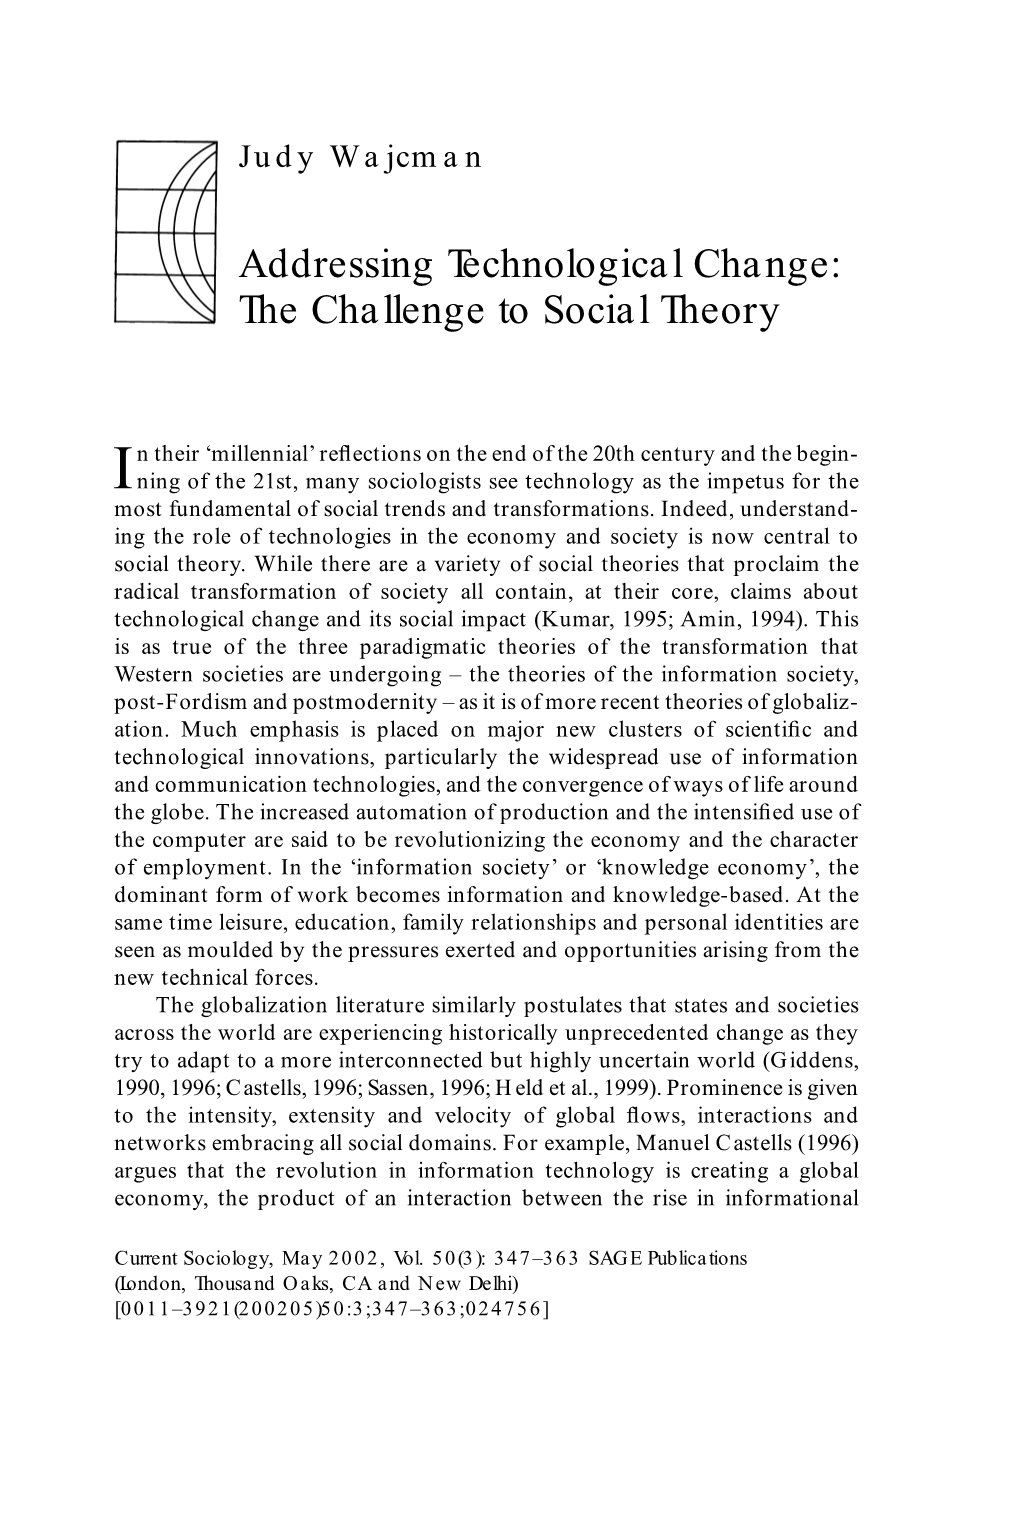 Addressing Technological Change: the Challenge to Social Theory